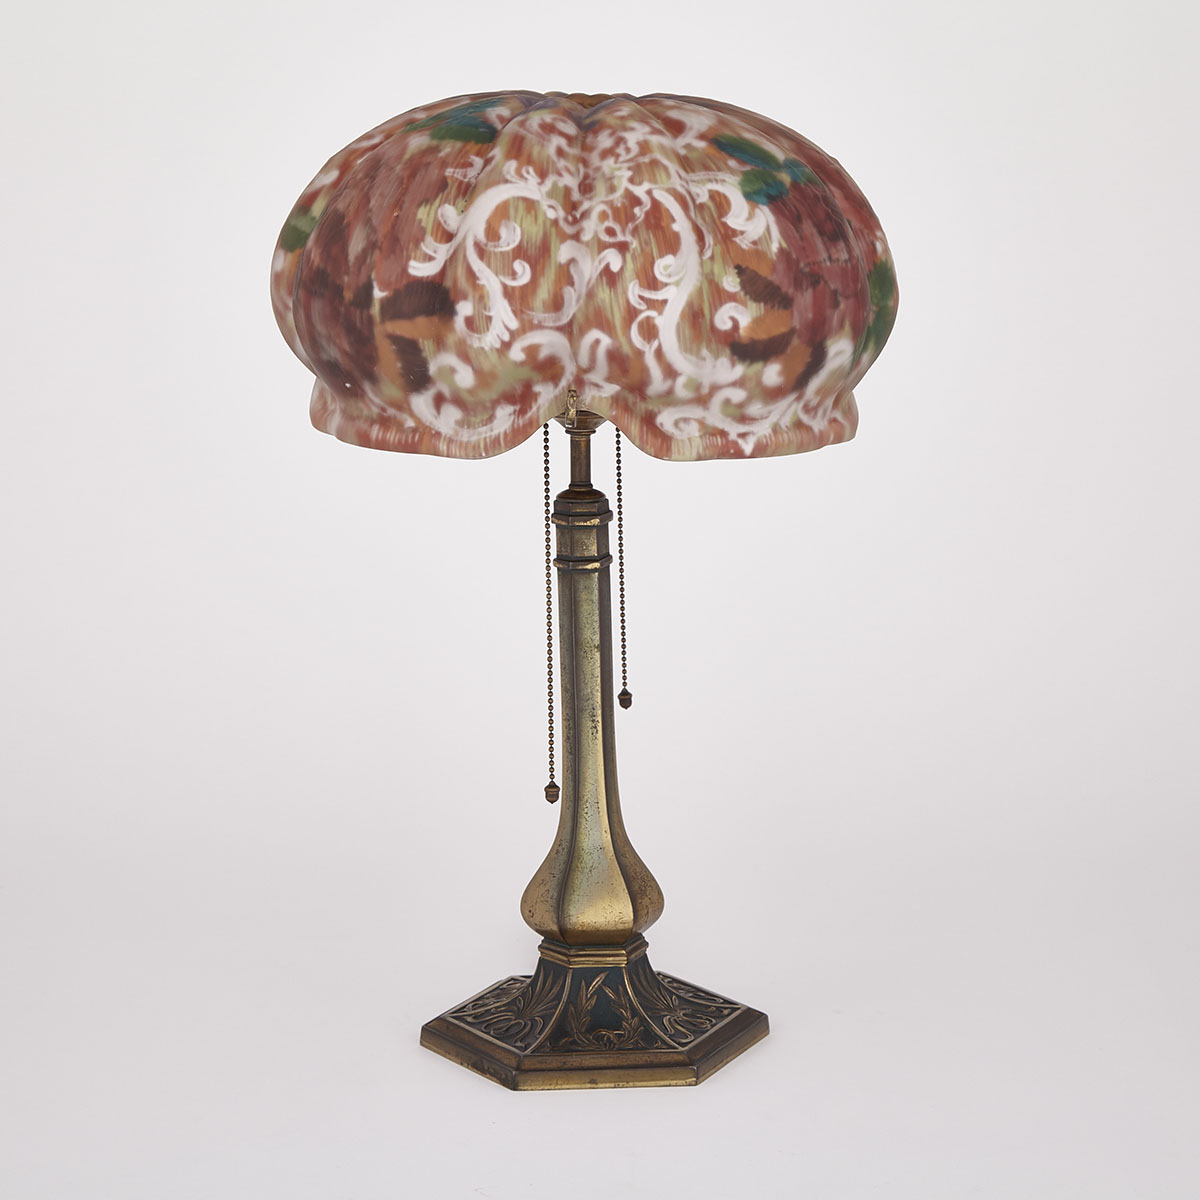 Pairpoint ‘Puffy’ Table Lamp, early 20th century